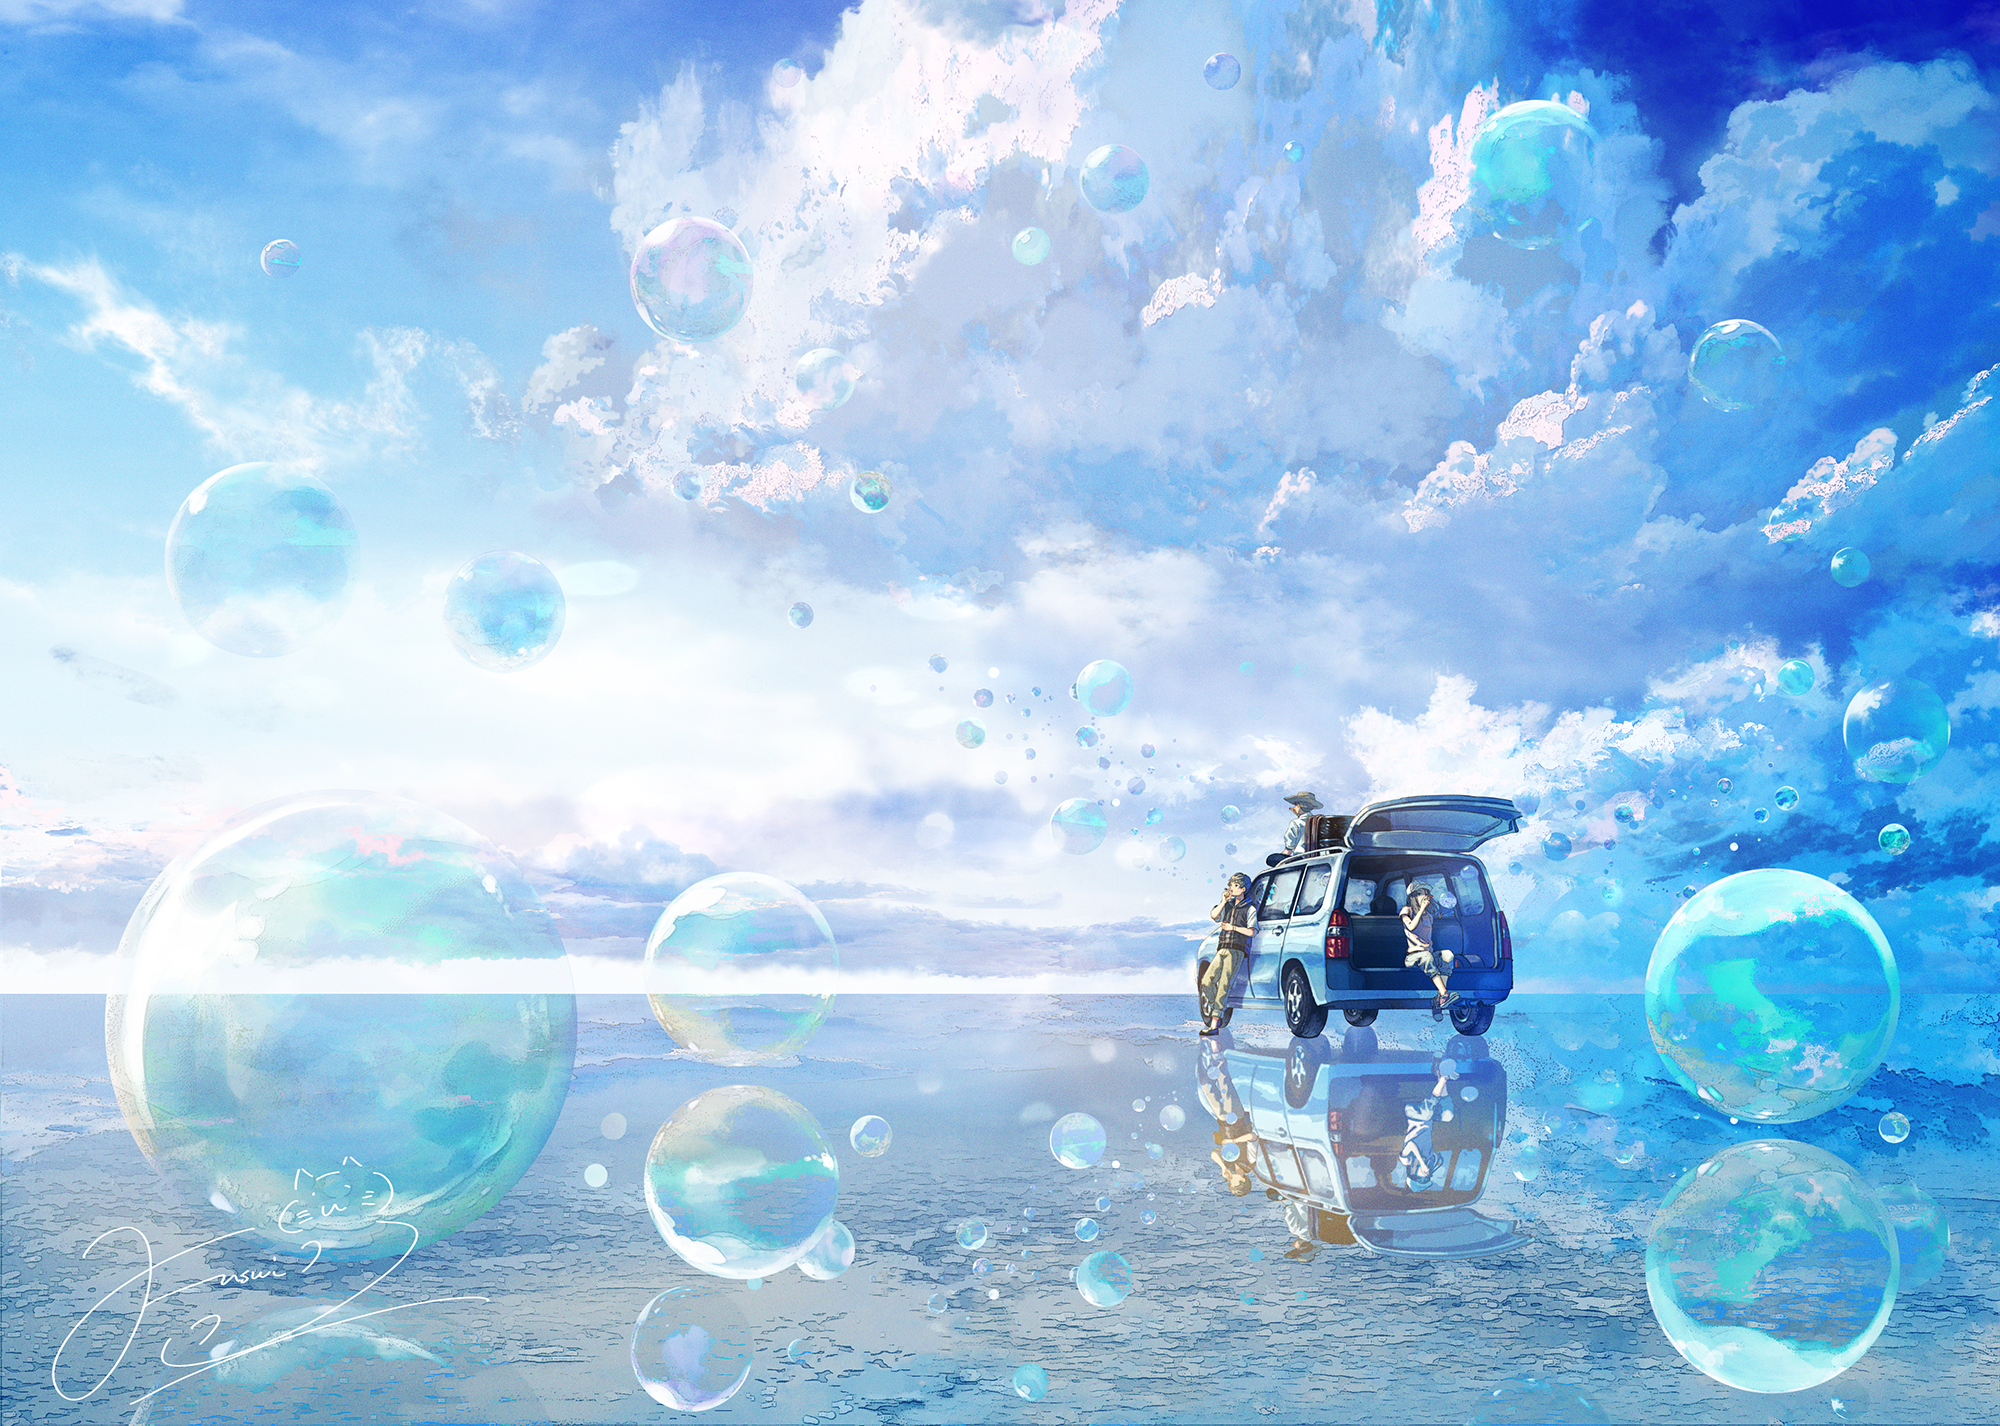 Anime Pixiv Water Sphere Reflection Anime Girls Anime Boys Bubbles Sky Clouds Vehicle 2000x1426